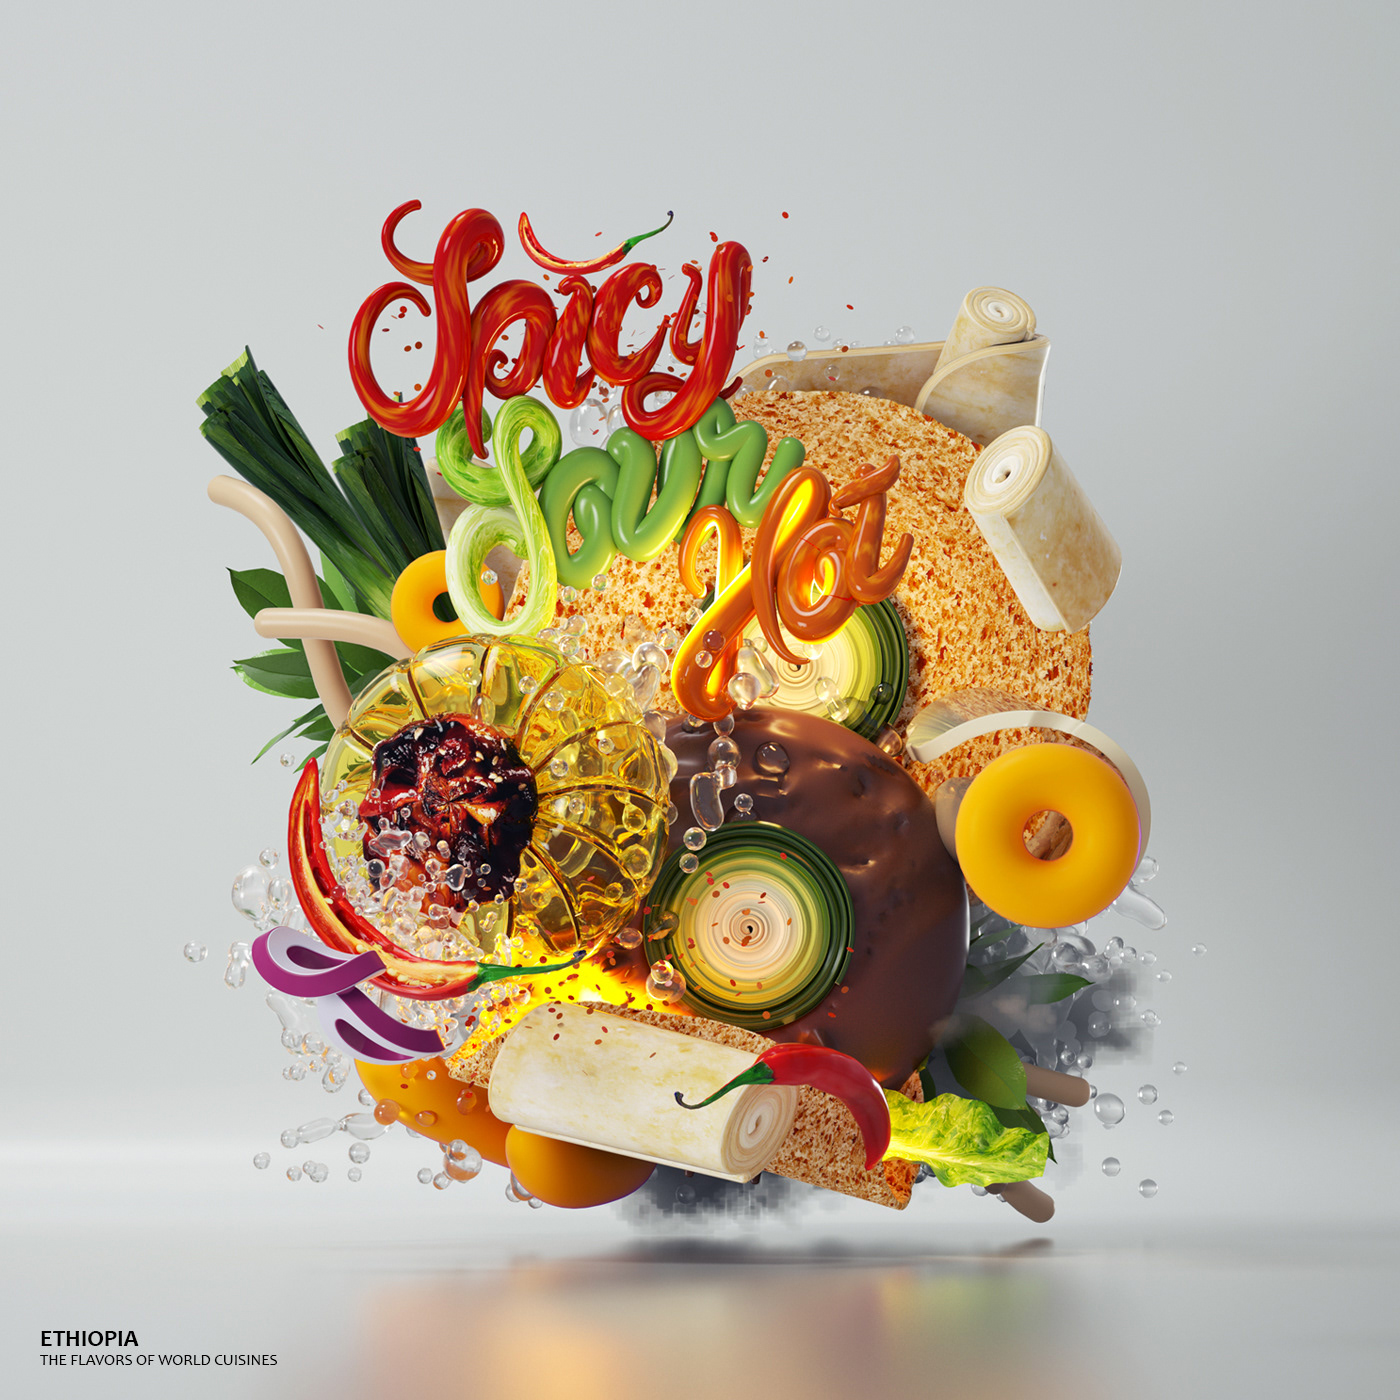 Art Direction & Illustration: The Flavors of World Cuisines